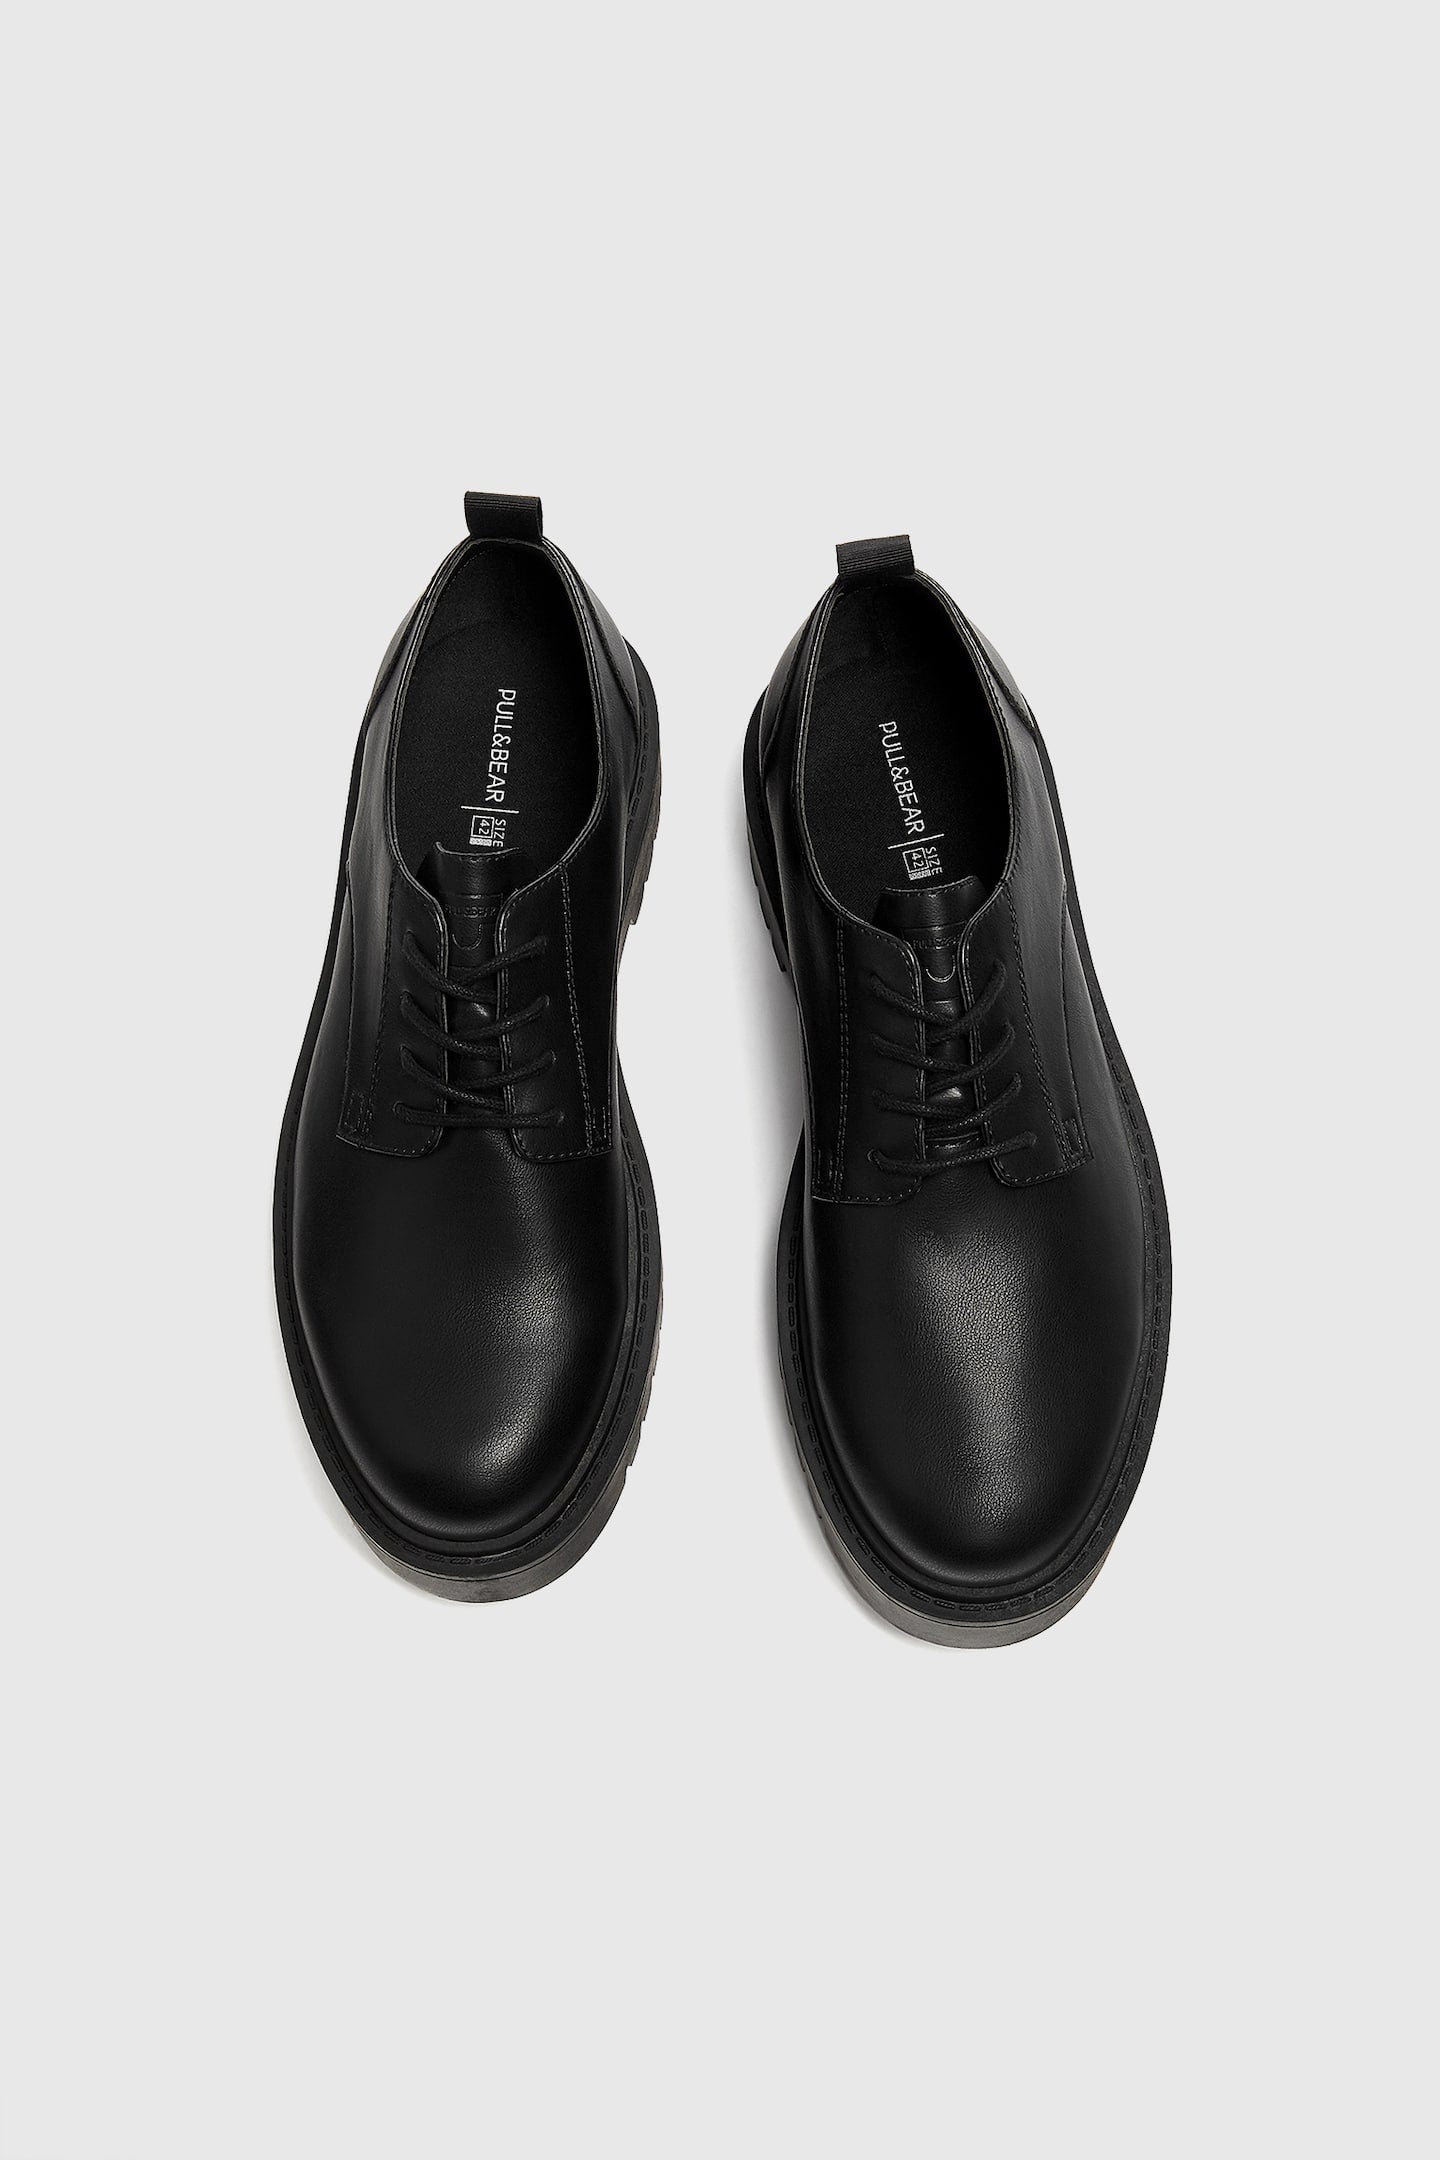 Pull&Bear lace up track Chunky shoes in black